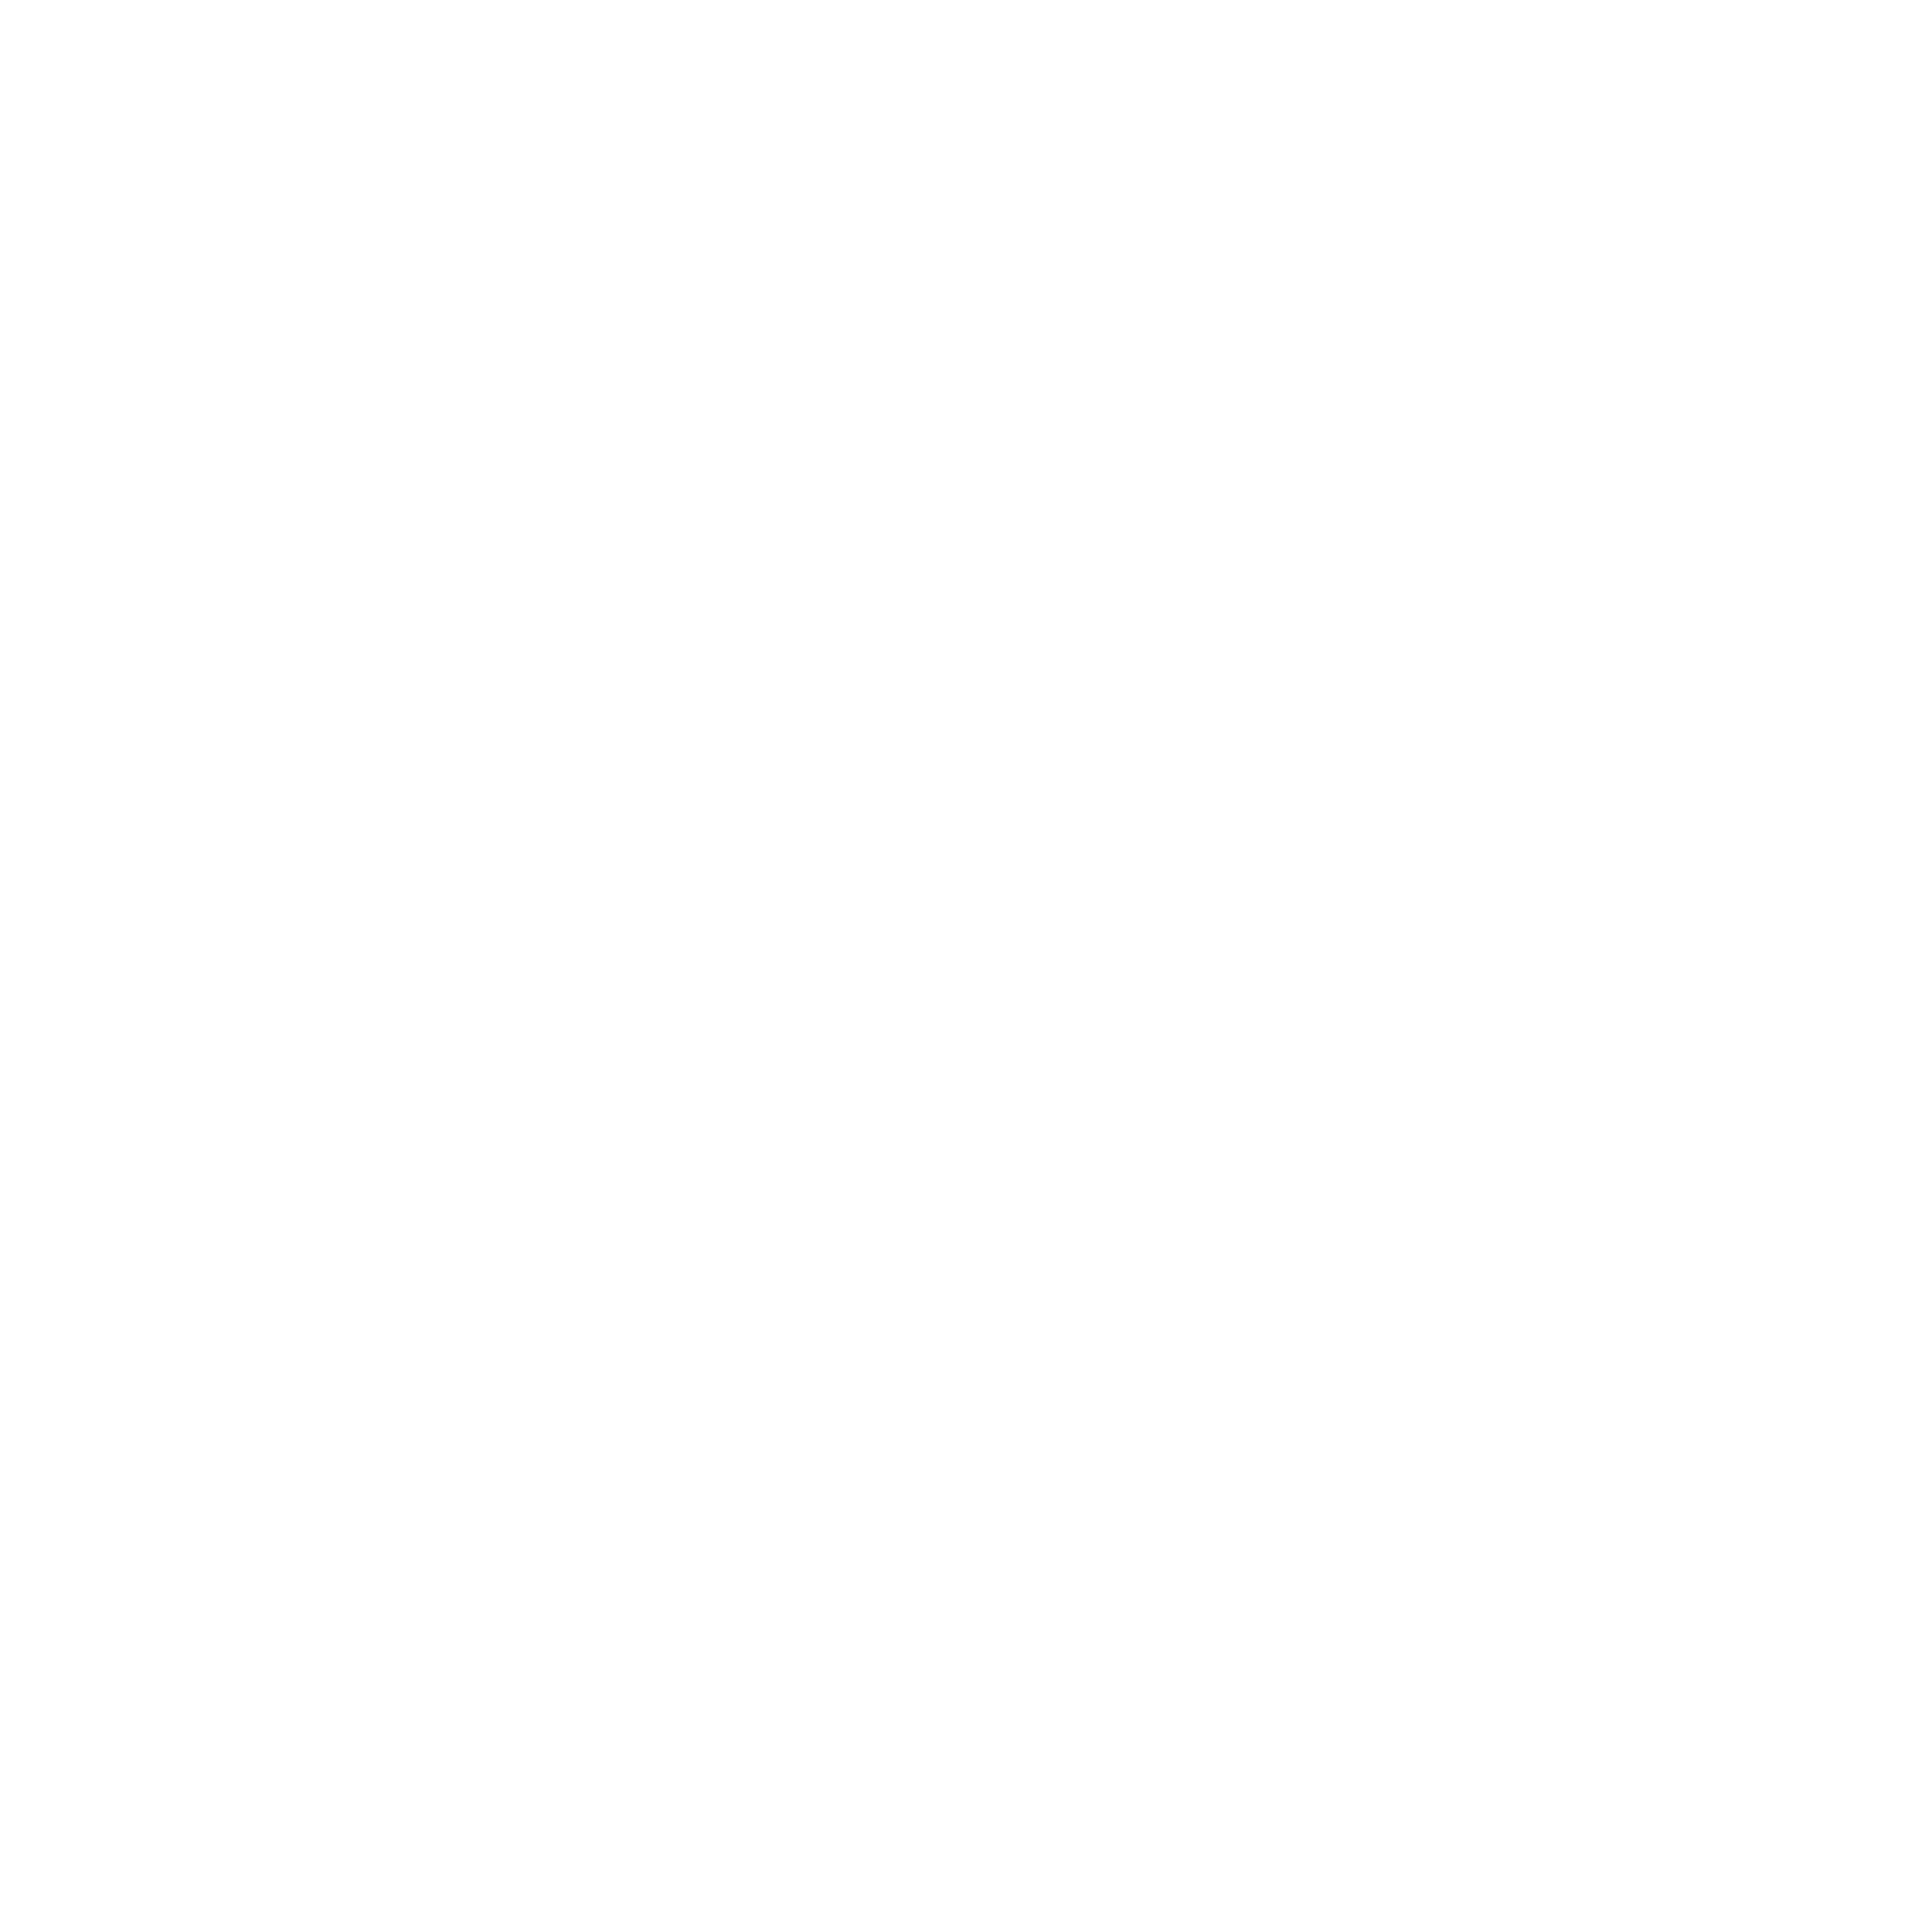 The Fallen Stag